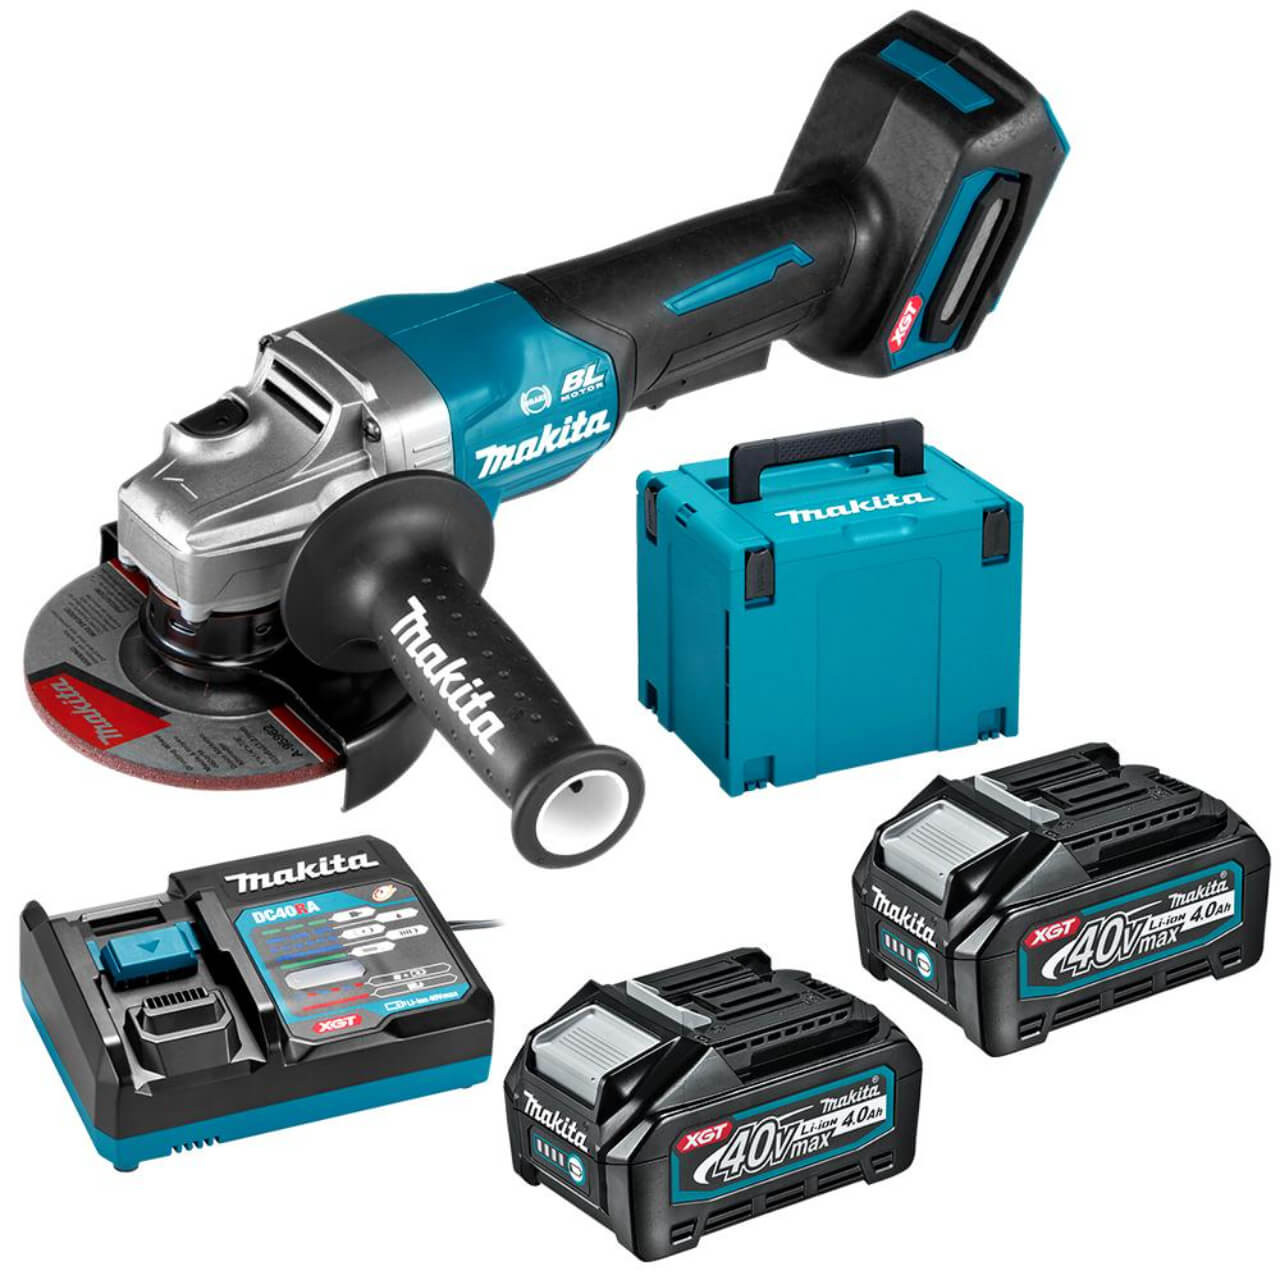 Makita 40V Max BRUSHLESS 125mm (5”) Angle Grinder. Paddle Switch - Includes 2 x 4.0Ah Batteries. Single Port Rapid Charger & Makpac Case Type 4BONUS: 18V LXT Battery Charging Adaptor (ADP10)